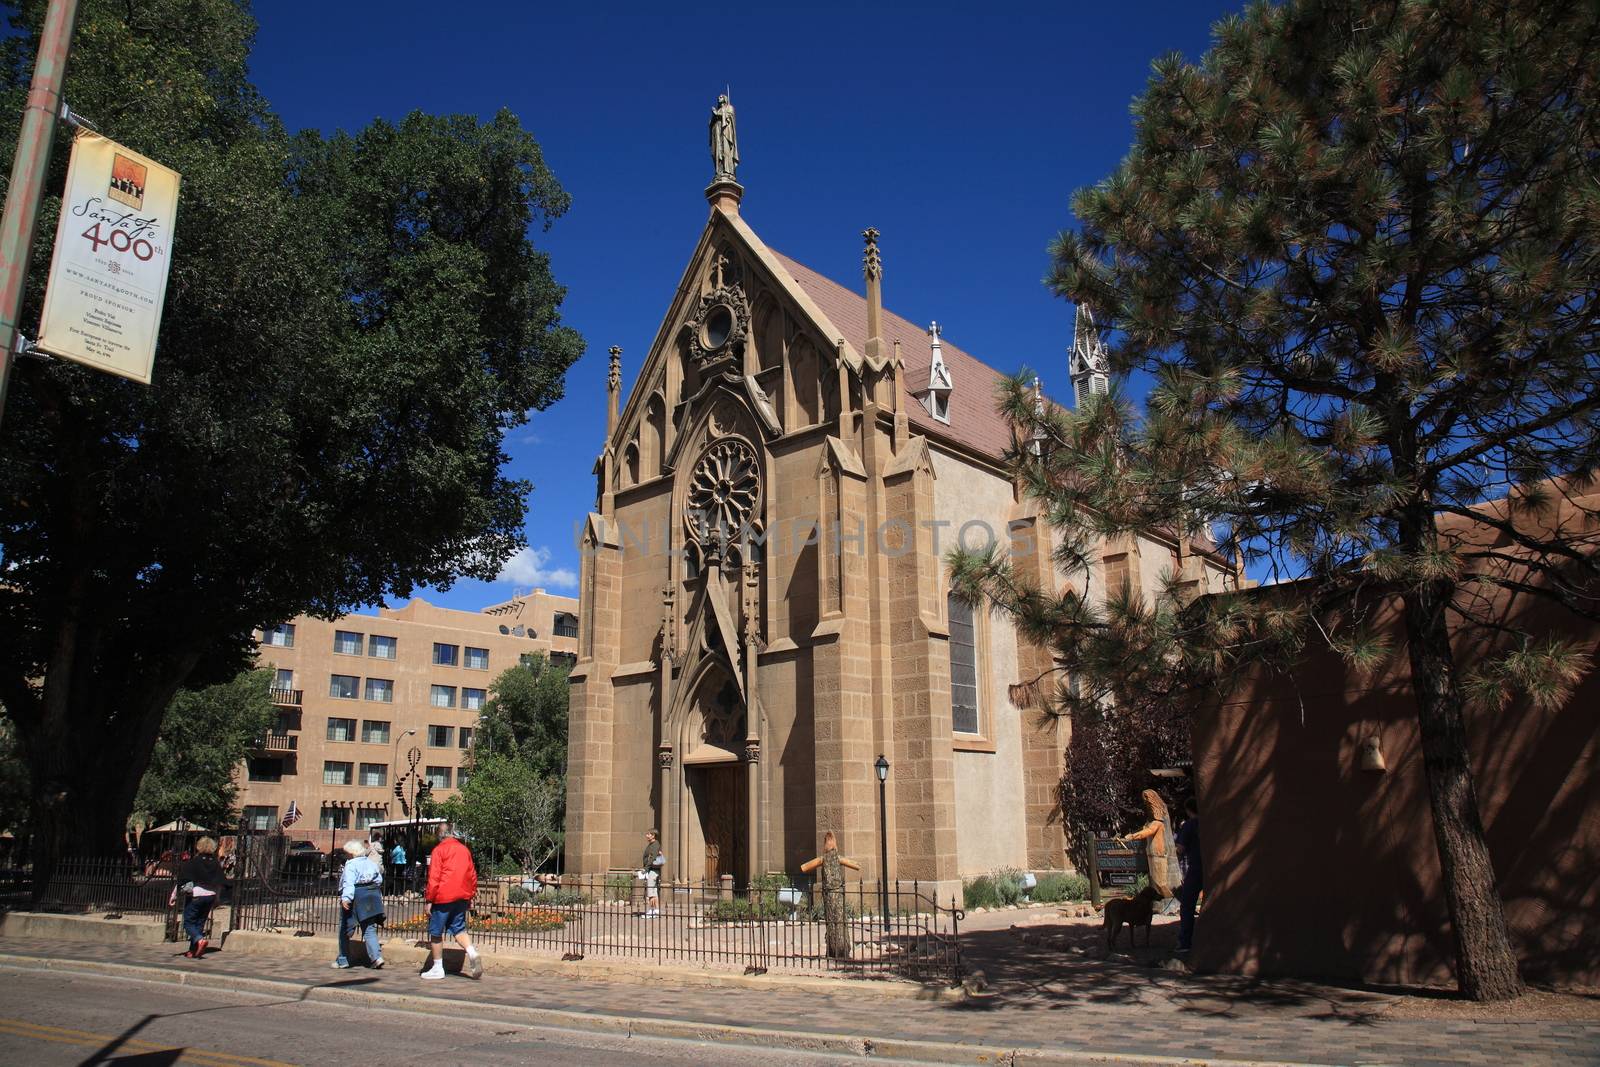 The Loretto Chapel, a Catholic Church now used as a museum in Santa Fe.